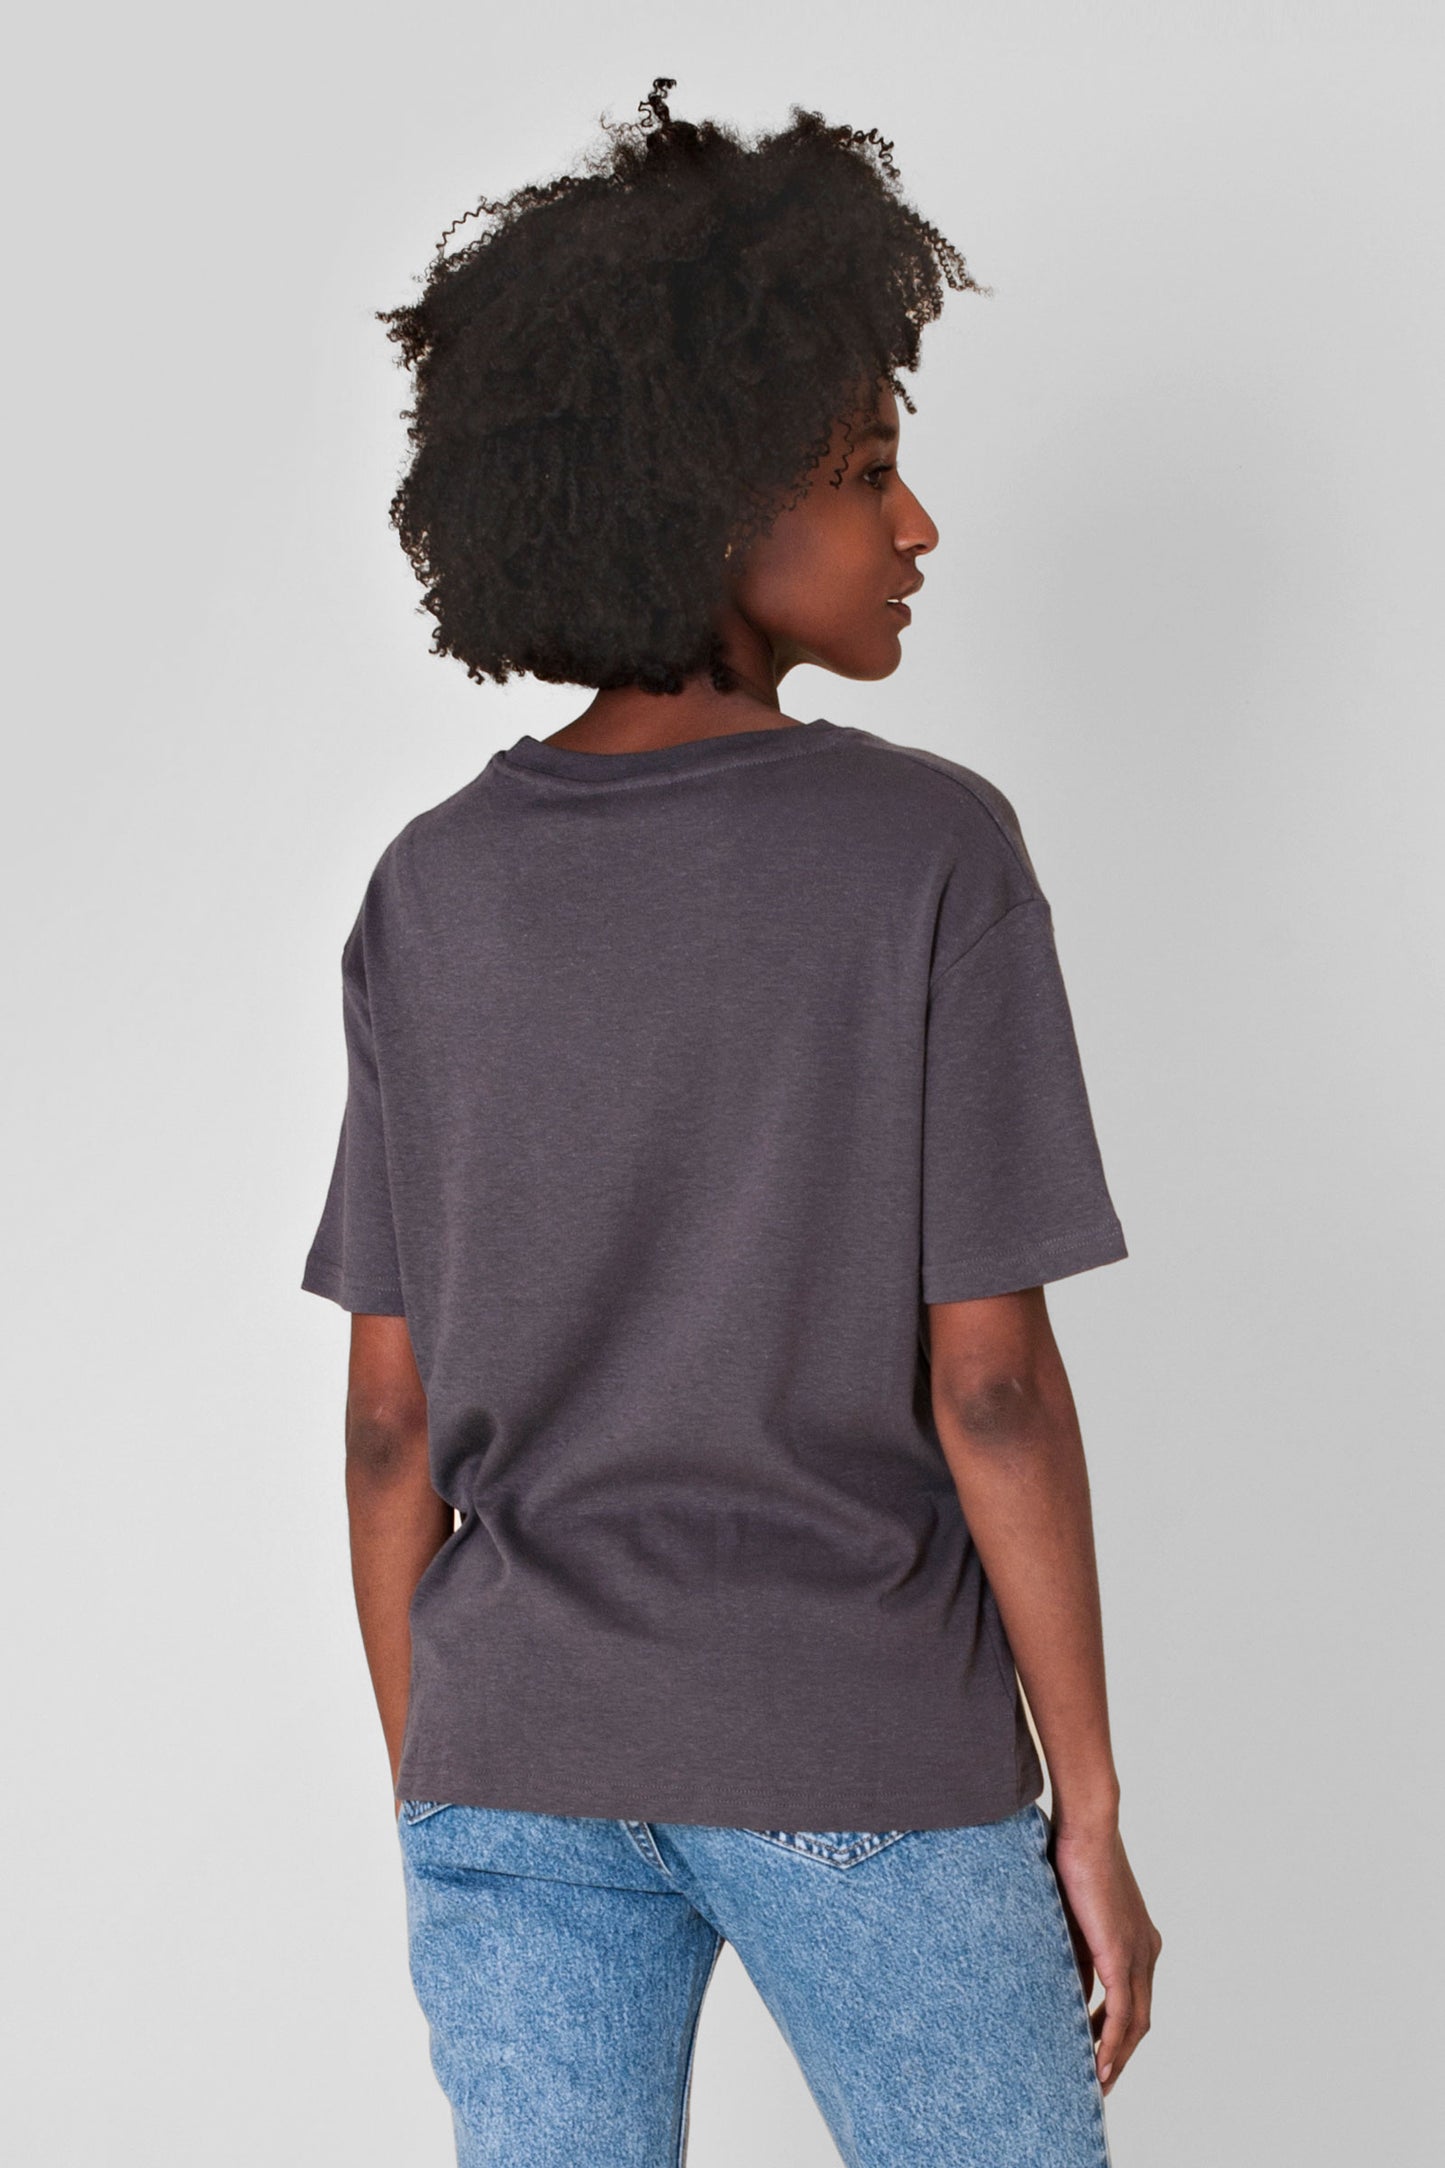 Soft and smooth boyfriend fit t-shirt made from a beautiful interlock hemp and organic cotton jersey. Breathable and anti-allergenic to the skin, this will easily be your summer's favorite hemp t-shirt.